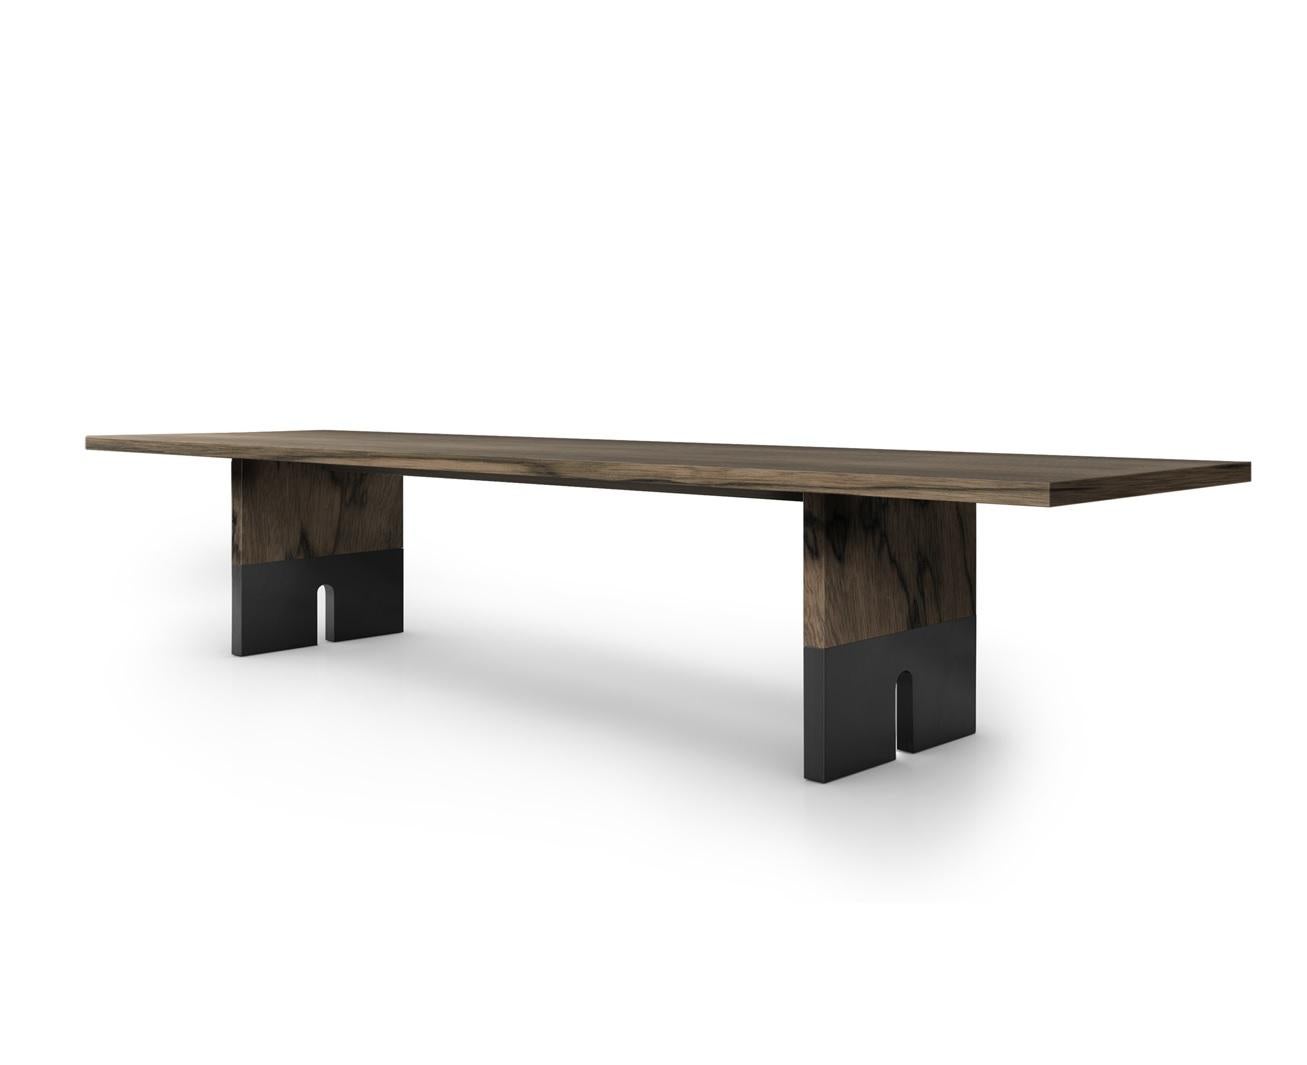 Mira table by LK Edition.
Dimensions: 380 x 105 x H 74 cm. 
Materials: exotic wood and metal. 

It is with the sense of detail and requirement, this research of the exception by the selection of noble materials and his culture of the French